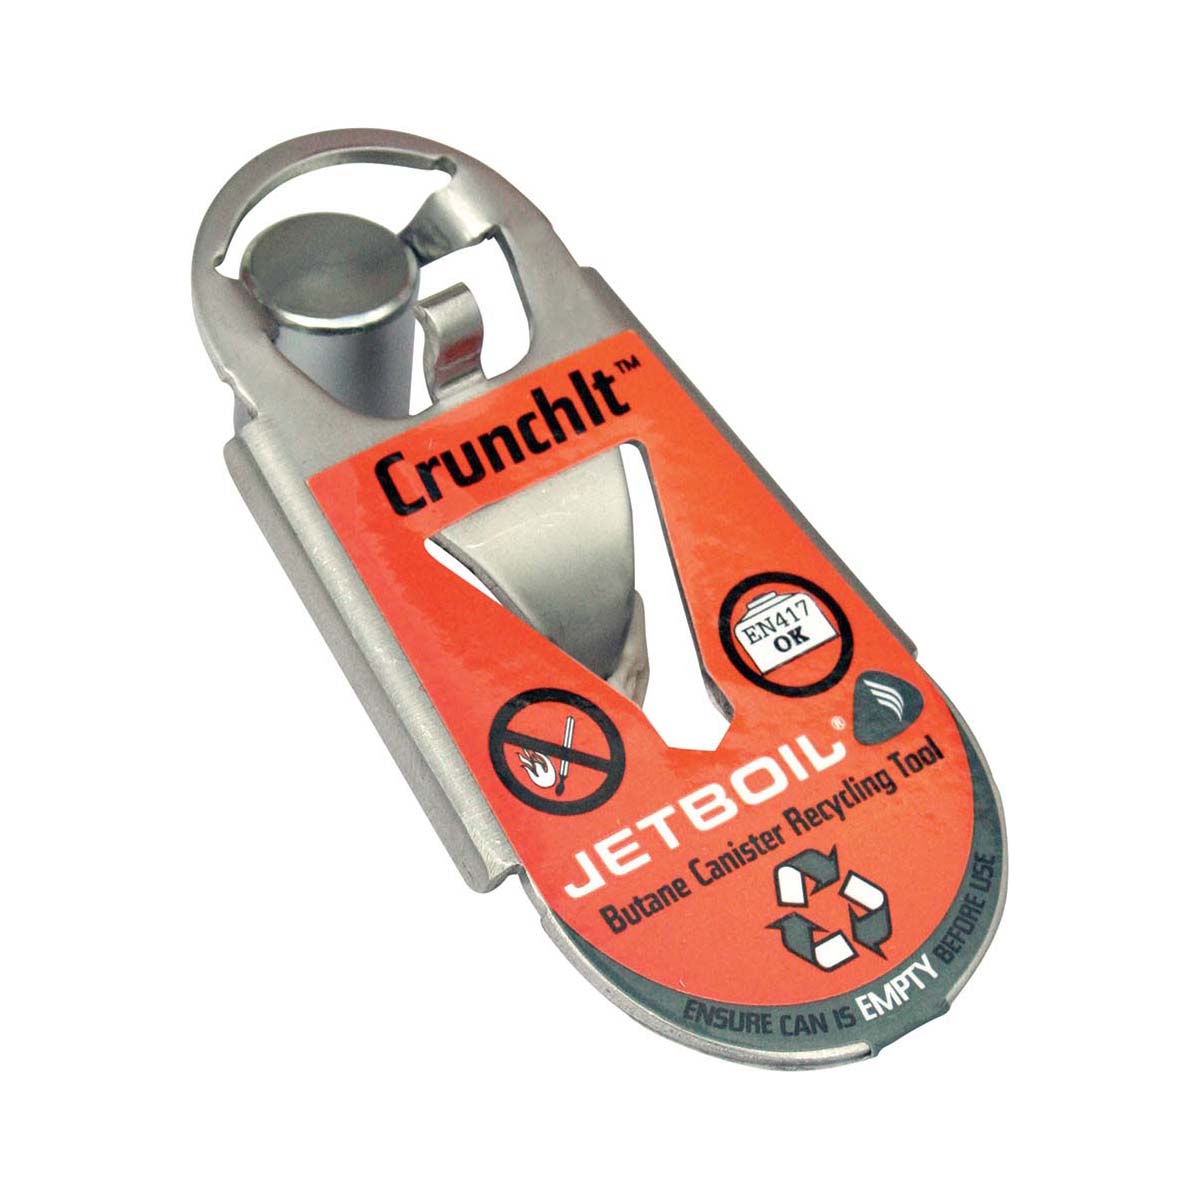 Jetboil CrunchIt Fuel Recycling Tool